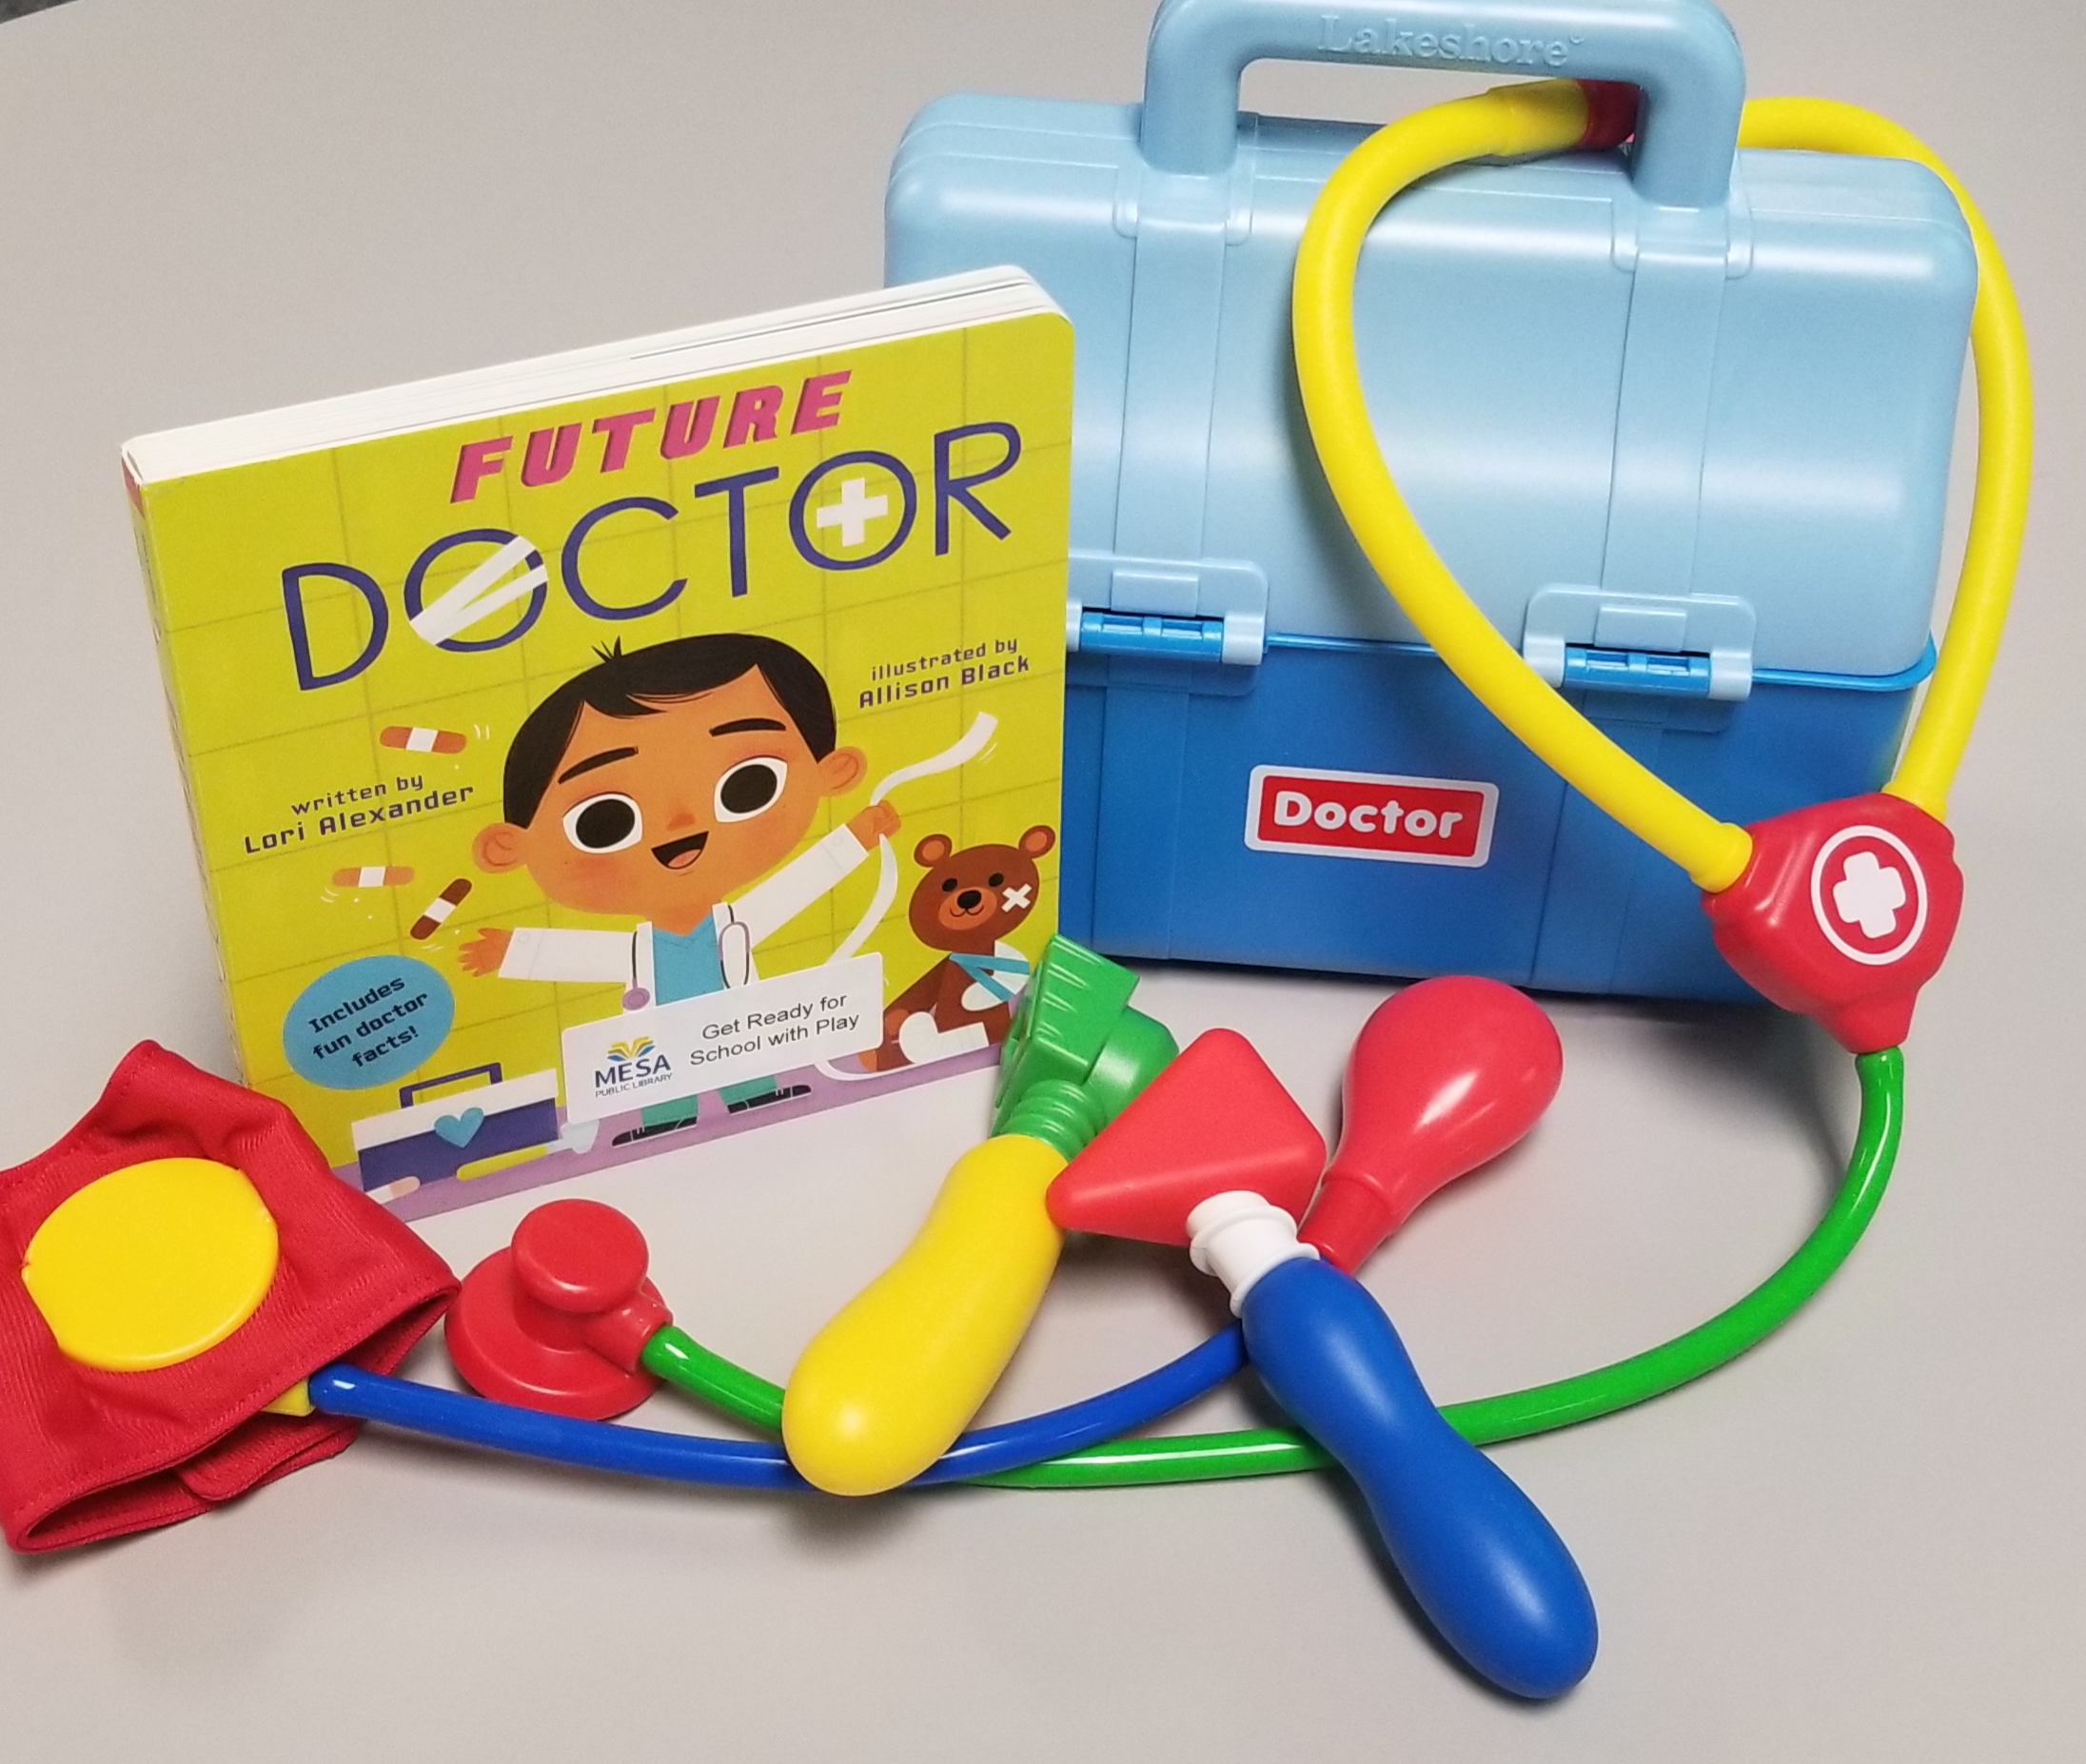 Picture of a doctor playset with multiple toys and a book, "Future Doctor"